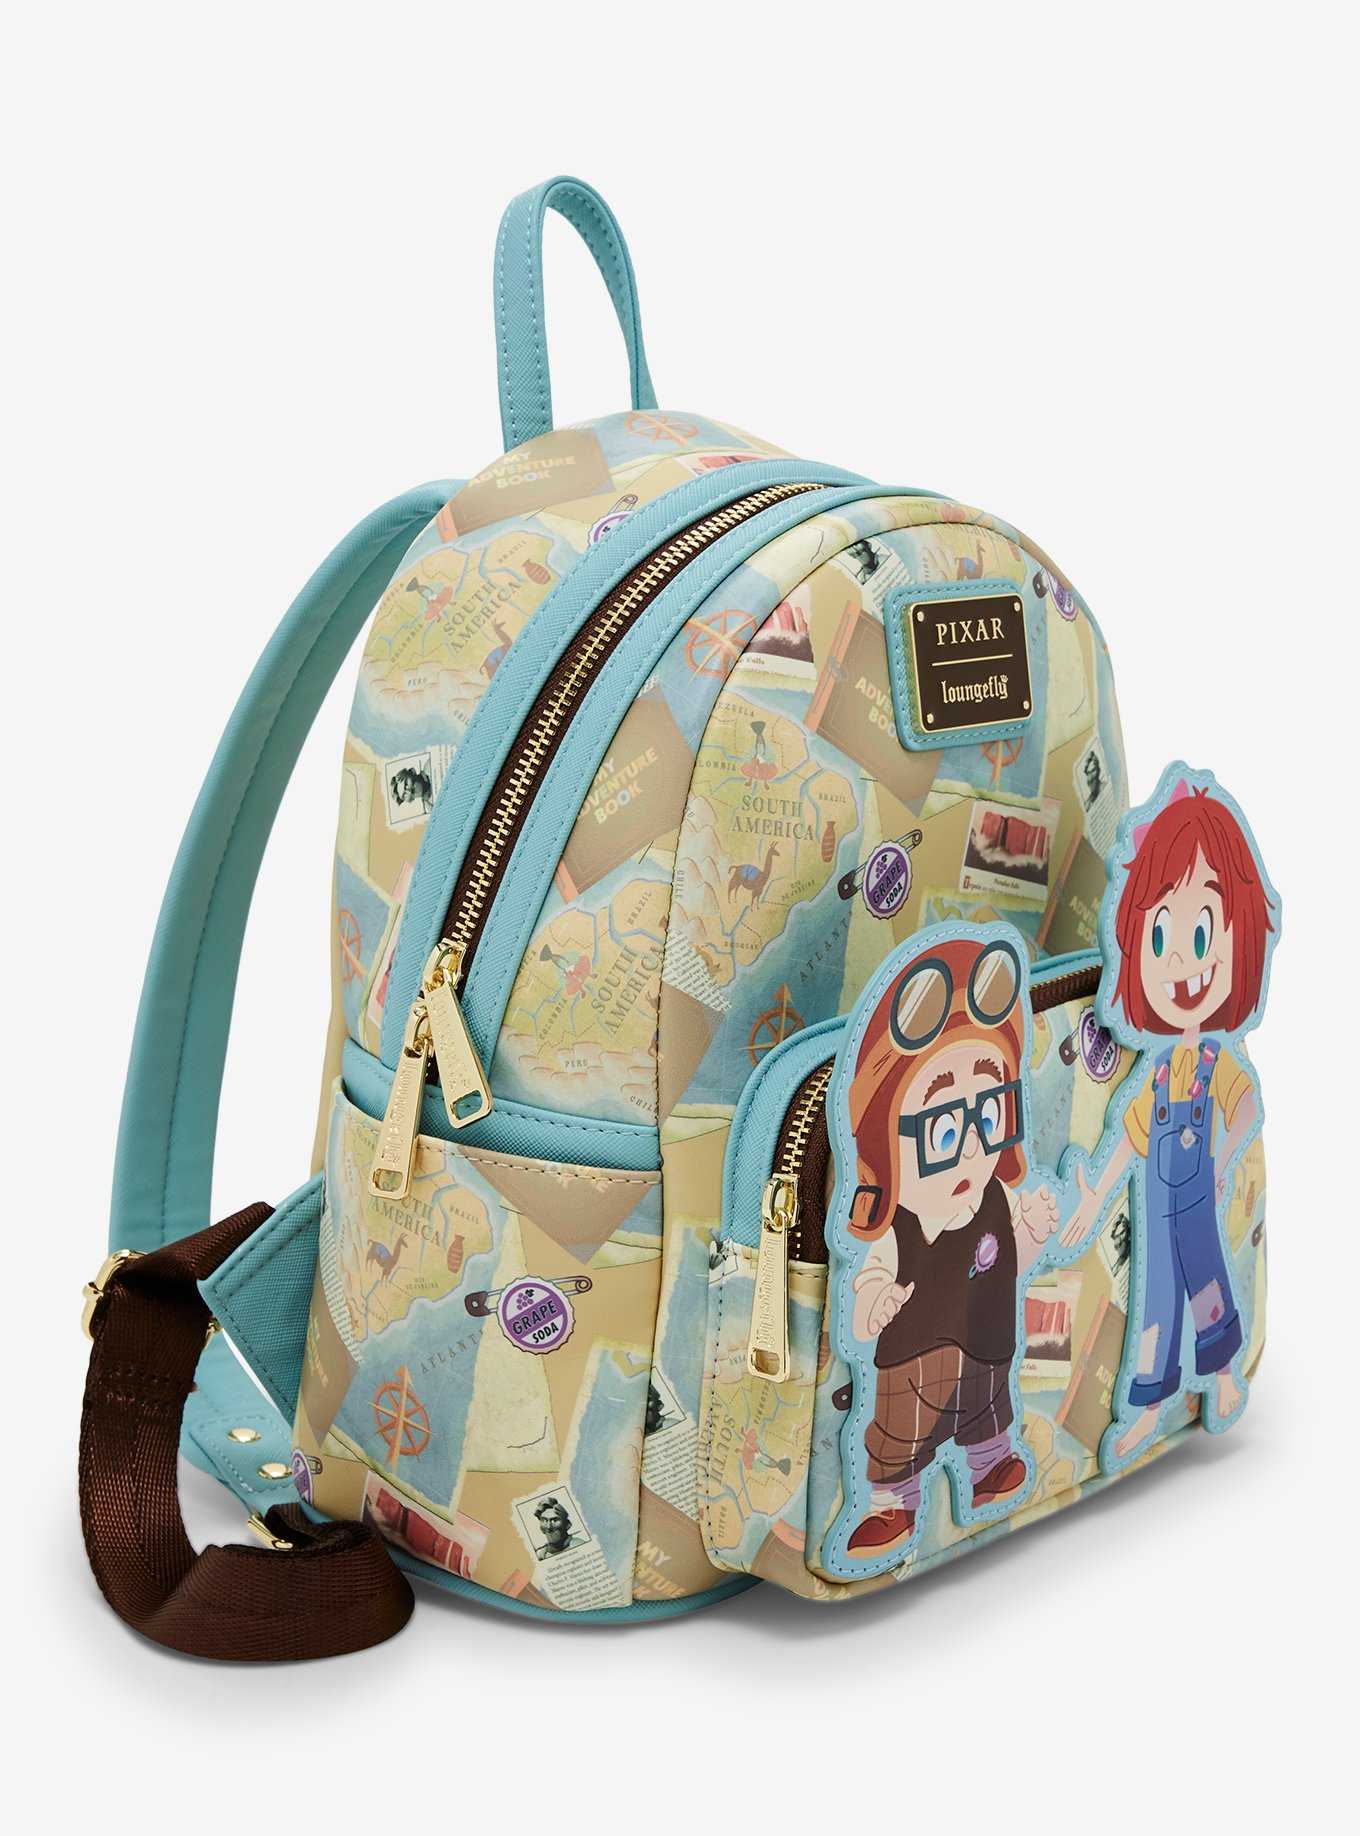 Loungefly Disney Pixar Up Young Carl & Ellie Adventure Mini Backpack - BoxLunch Exclusive, , hi-res